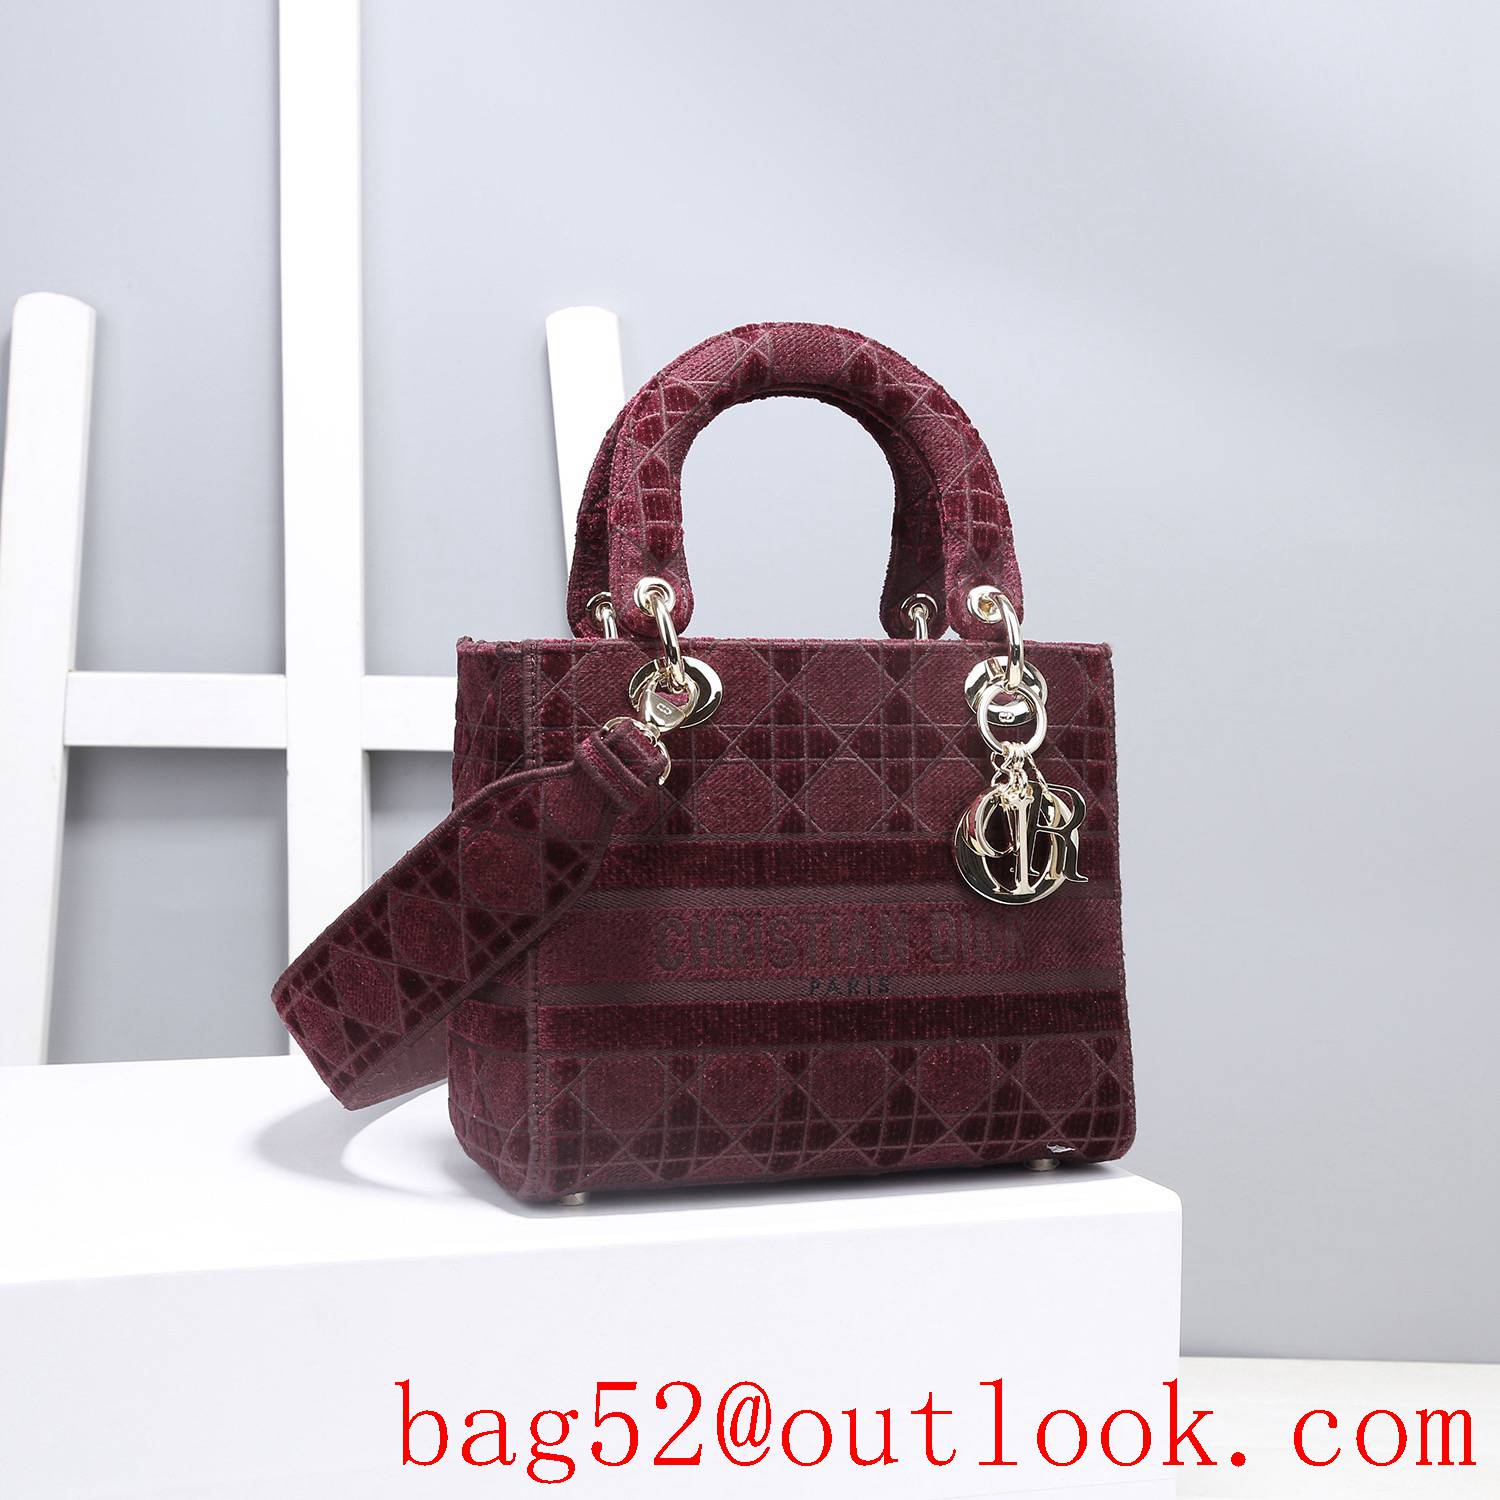 Dior Five panels of burgundy velvet embroidered cannage pattern throughout winered tote bag